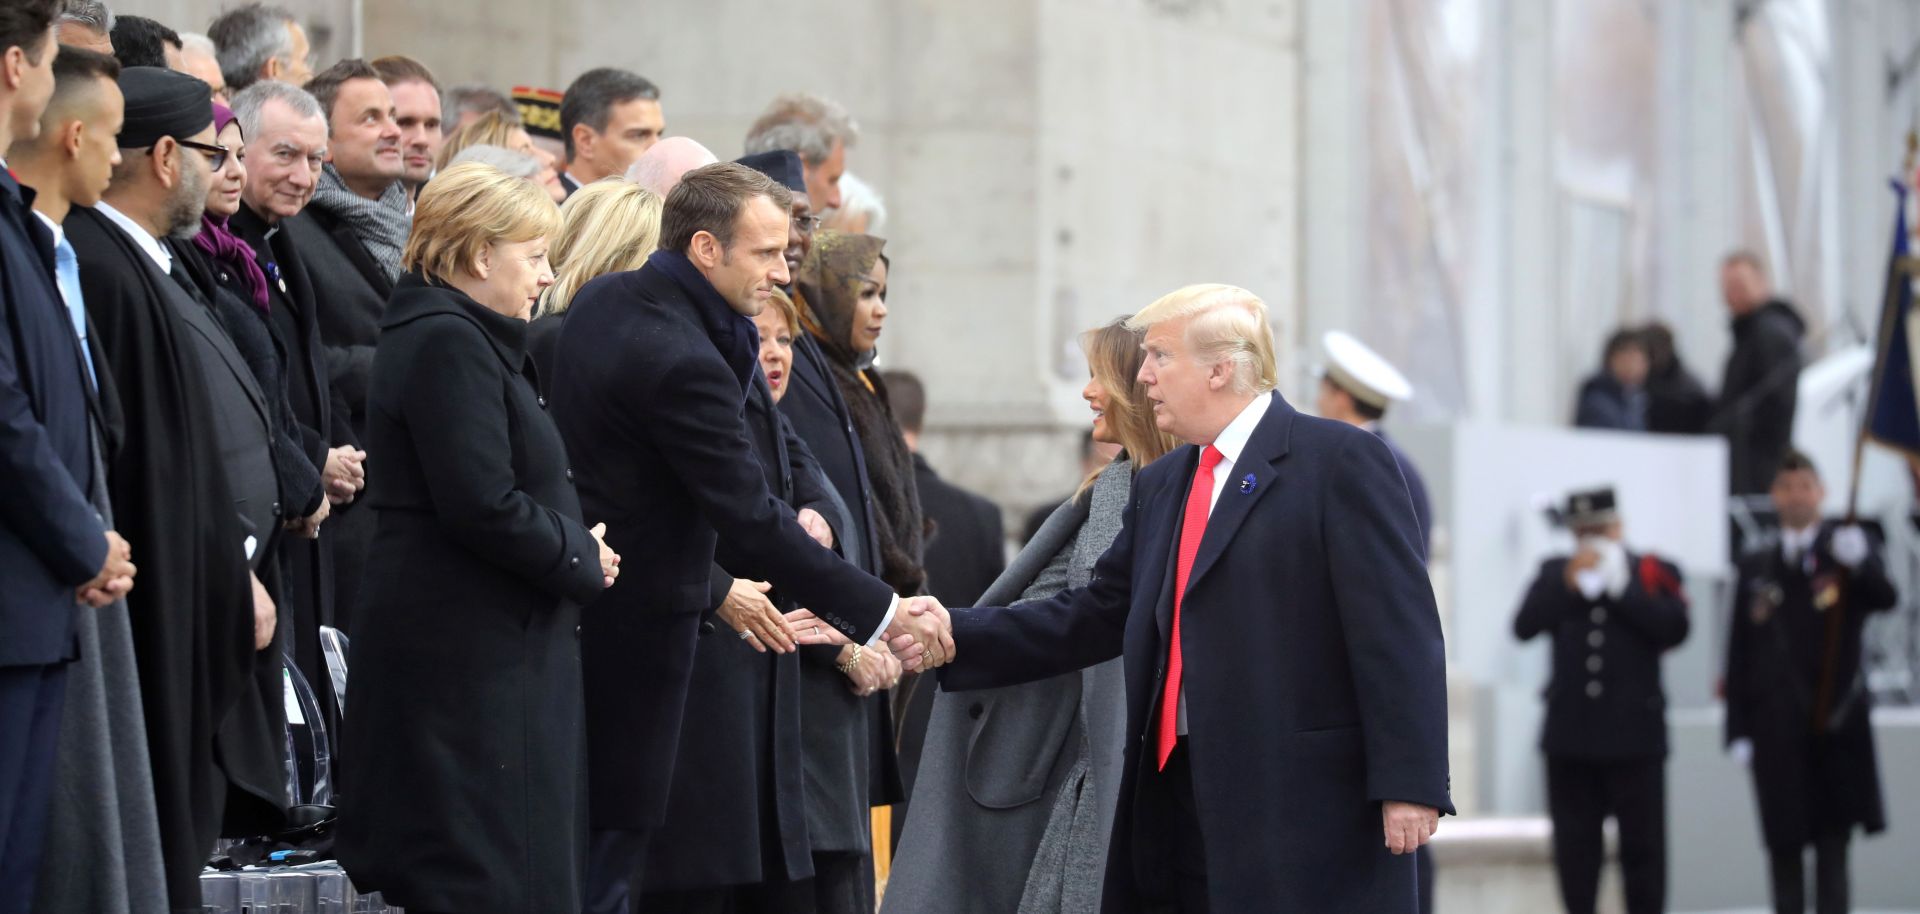 U.S. President Donald Trump greets French President Emmanuel Macron in Paris on Nov. 11, 2018, during commemorations marking the 100th anniversary of the end of World War I.